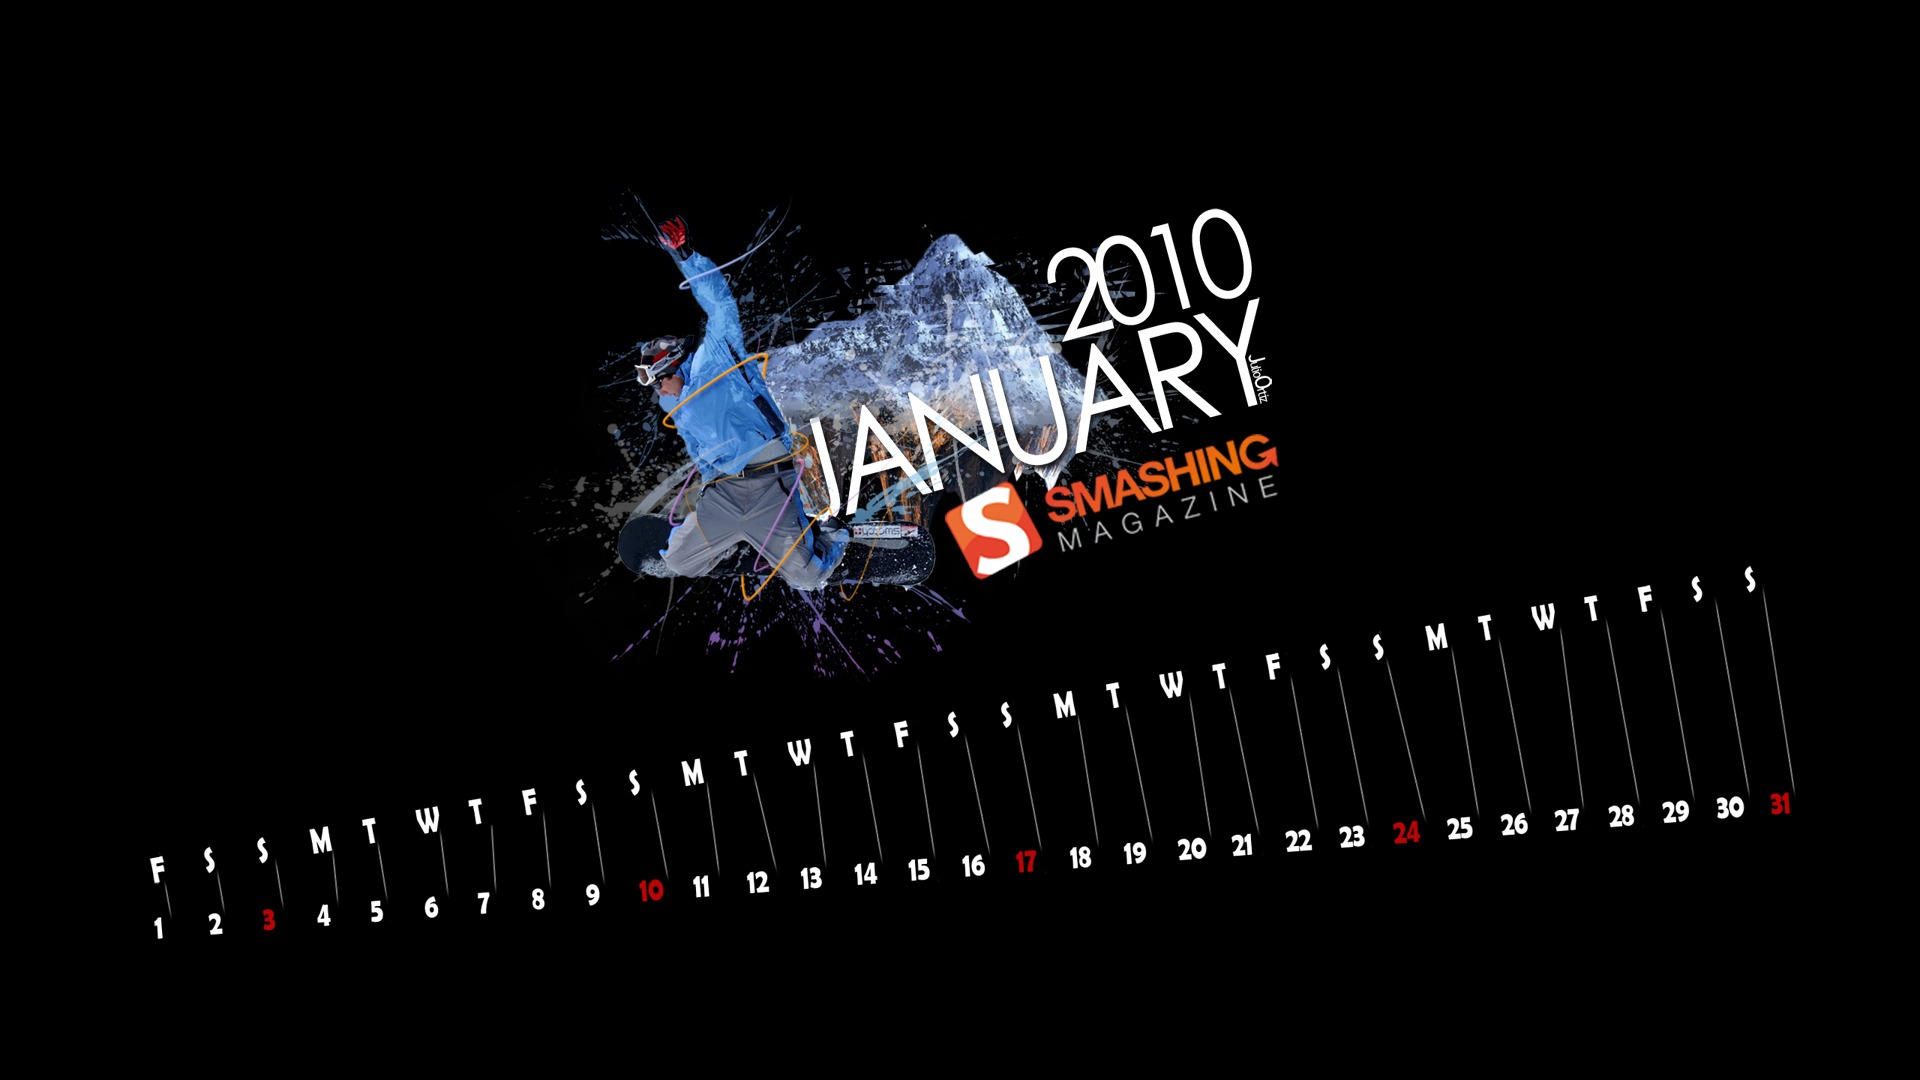 Microsoft Official Win7 New Year Wallpapers #9 - 1920x1080